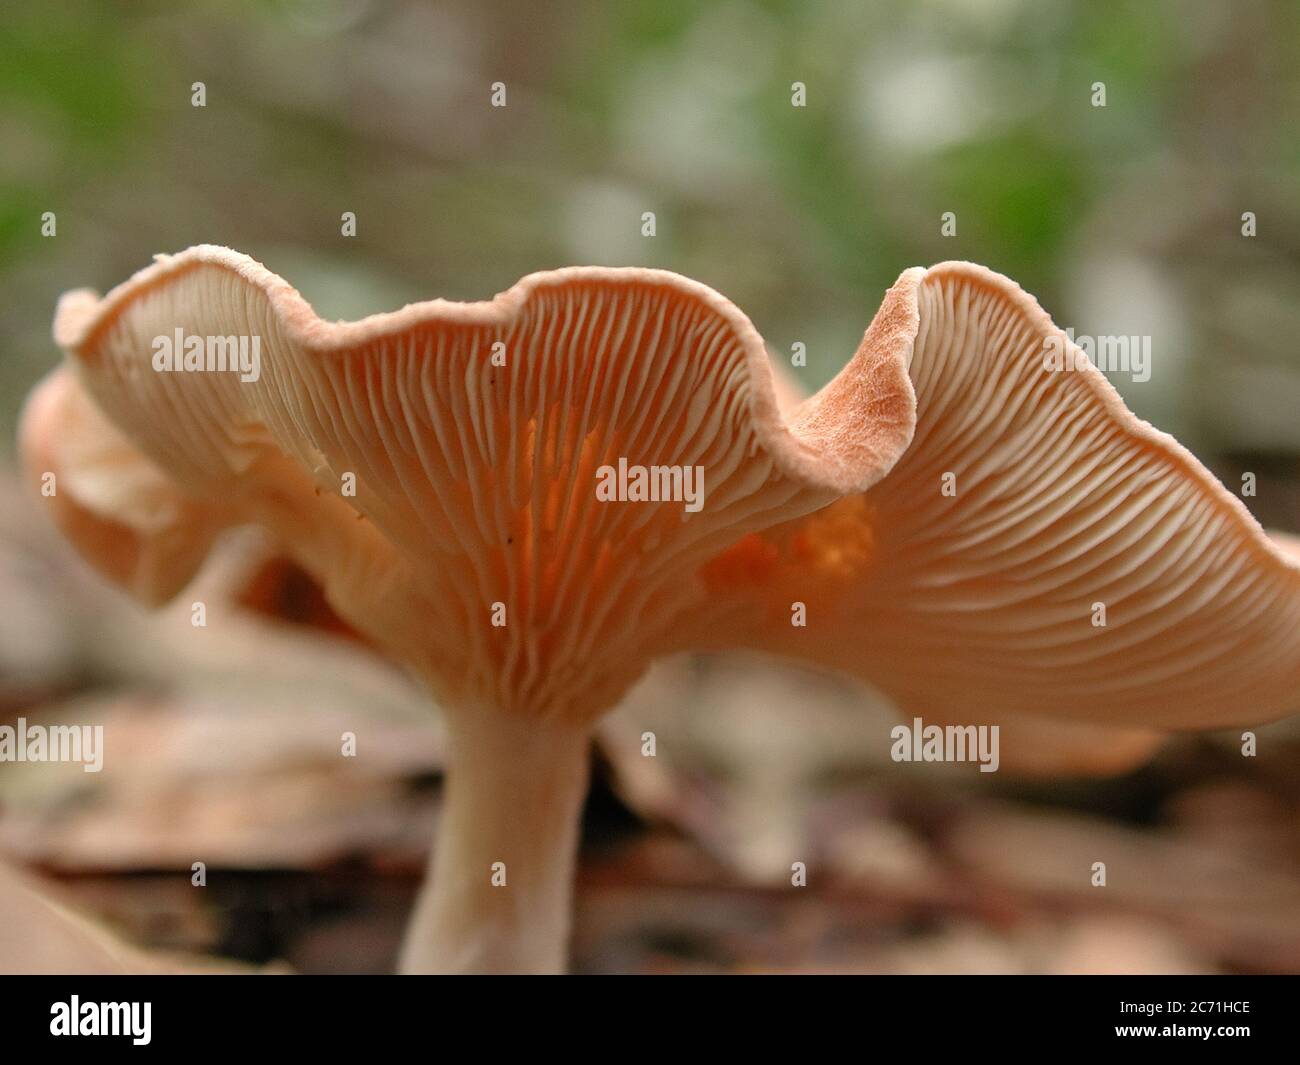 Mushrooms are a form of fungi found in natural settings around the world.  This one is found in a forested area of North Central Florida. Stock Photo